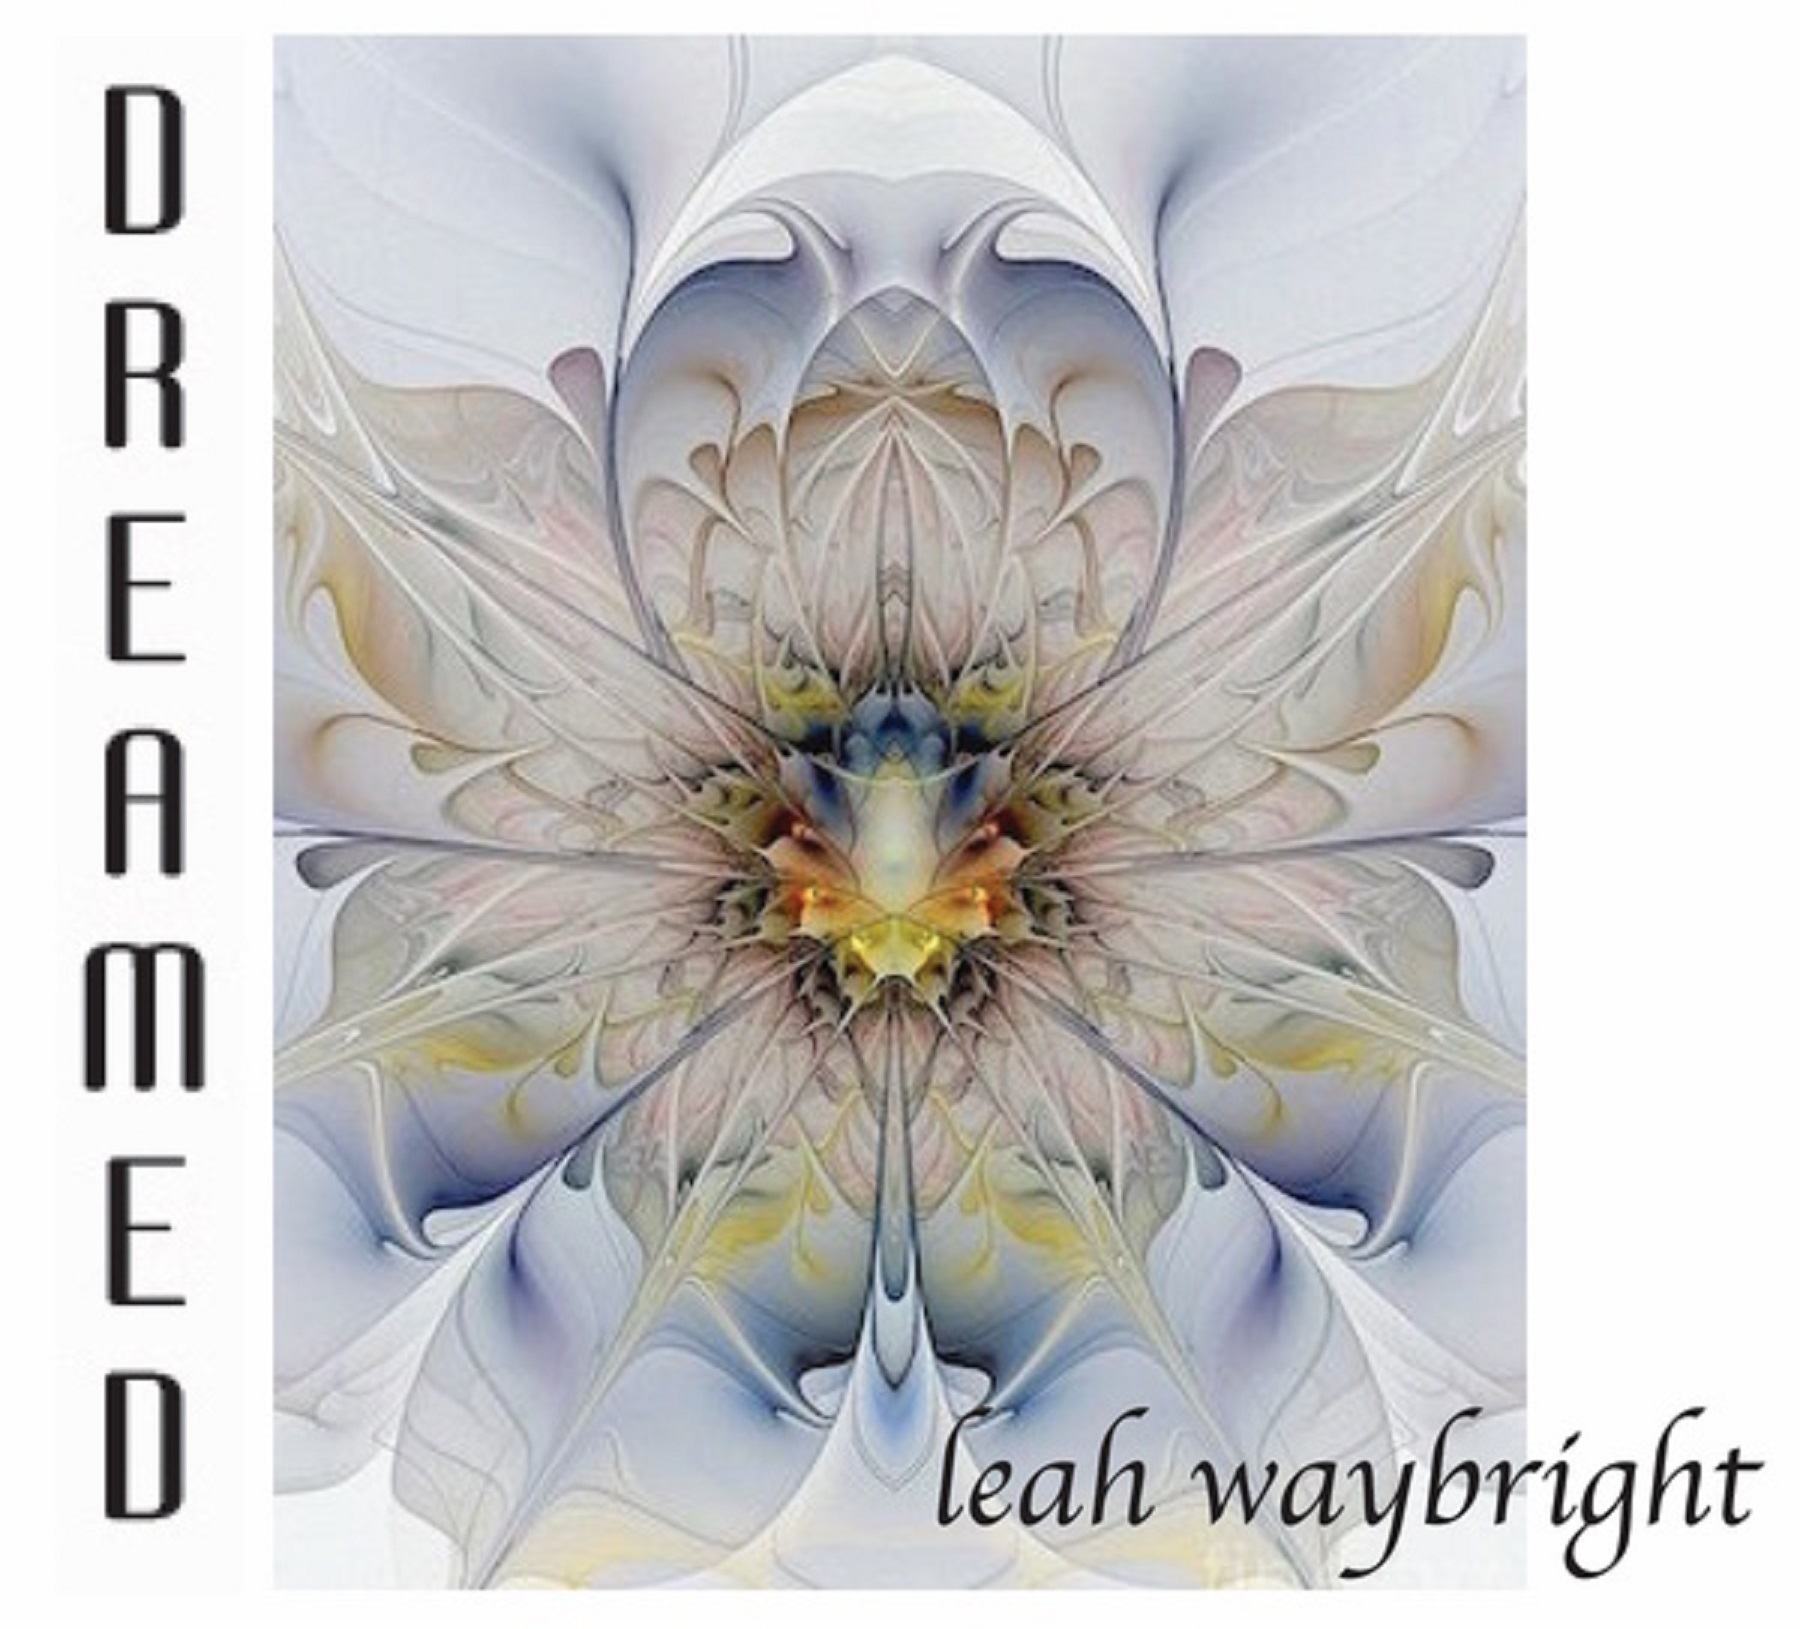 Composer, Pianist Leah Waybright To Release New Album “Dreamed” Featuring Members of Happy The Man, Trans-Siberian Orchestra and Steely Dan